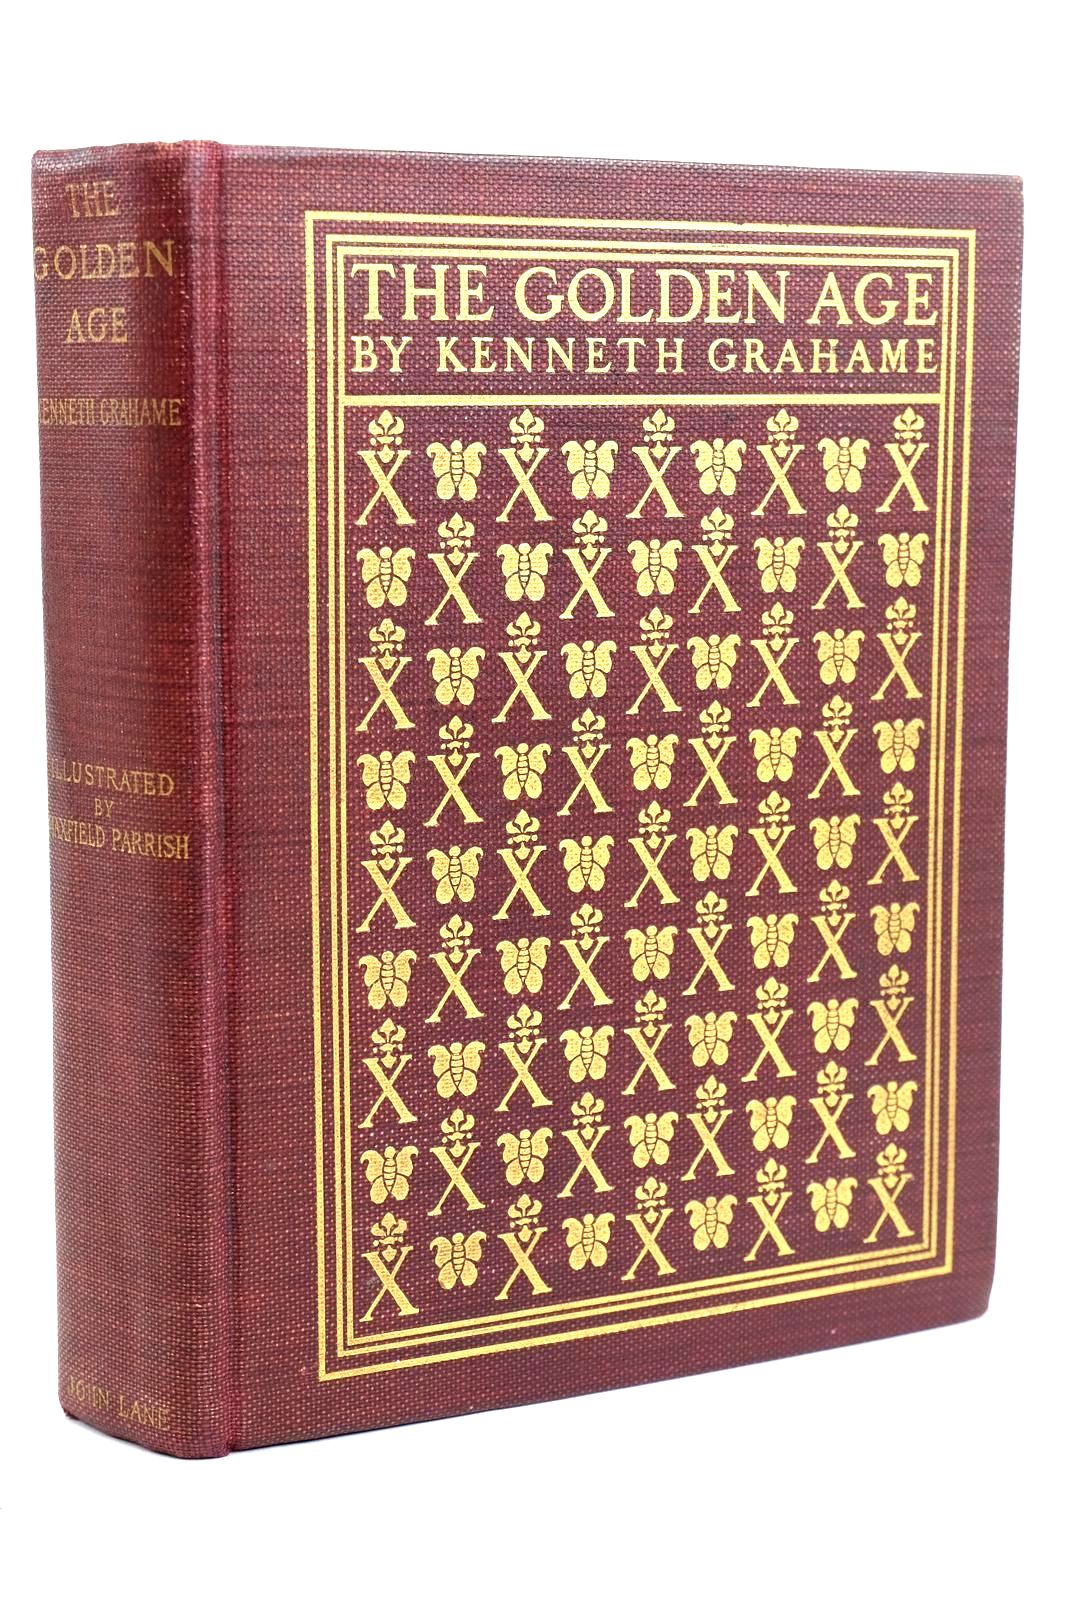 Photo of THE GOLDEN AGE written by Grahame, Kenneth illustrated by Parrish, Maxfield published by John Lane, The Bodley Head (STOCK CODE: 1320460)  for sale by Stella & Rose's Books